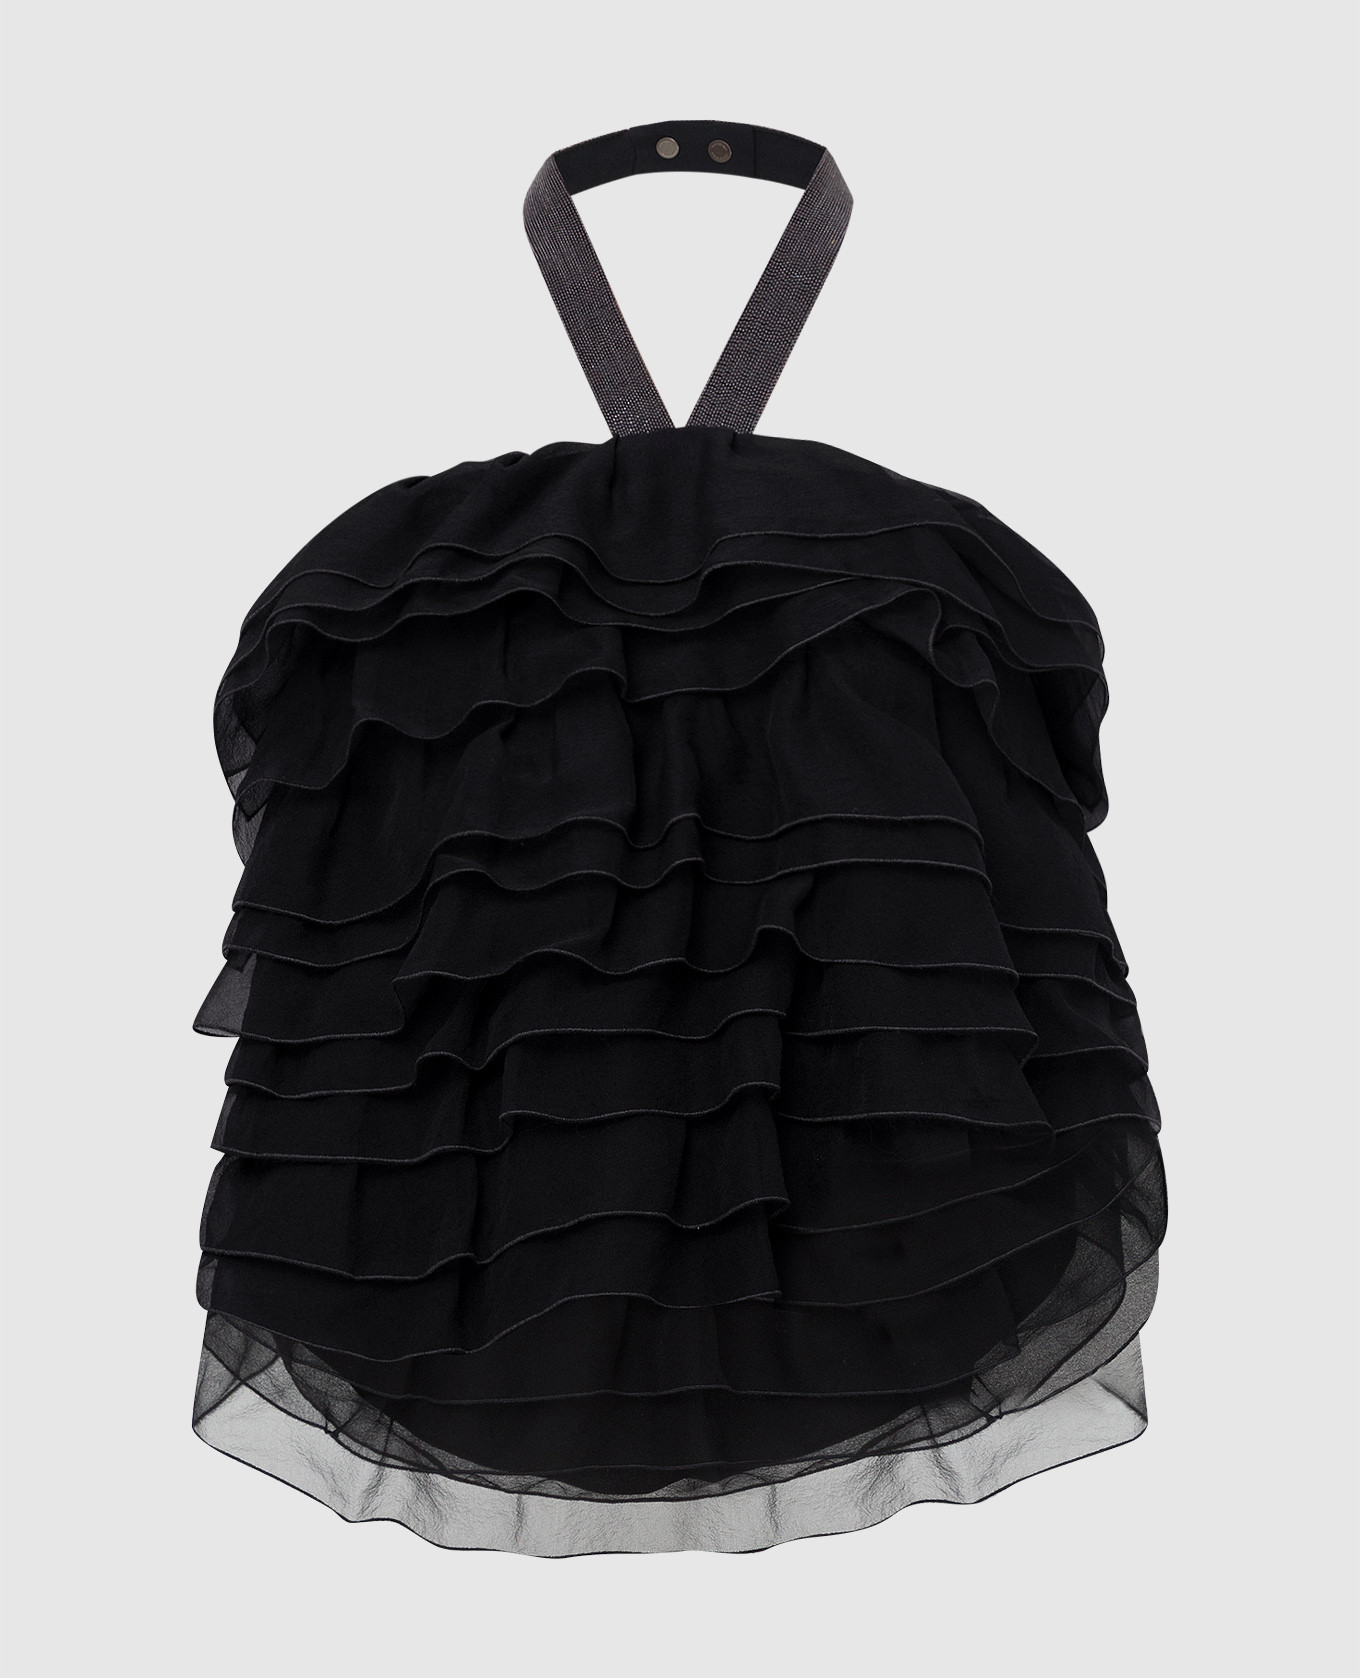 Black silk top with frills and chains